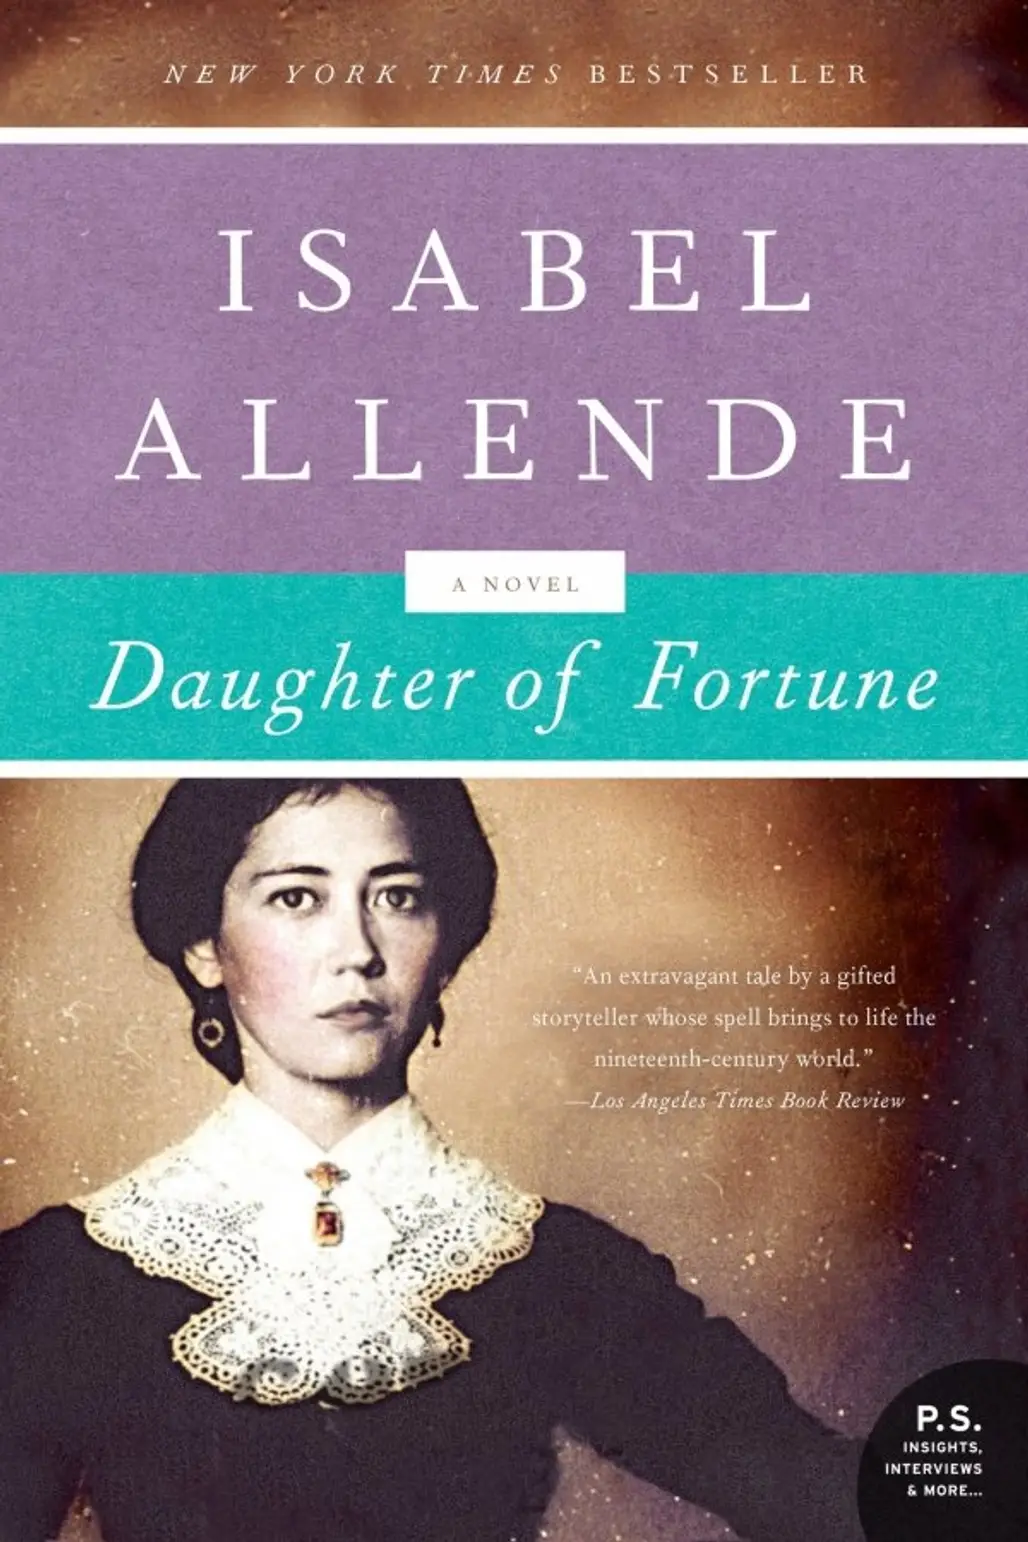 Daughter of Fortune, by Isabel Allende